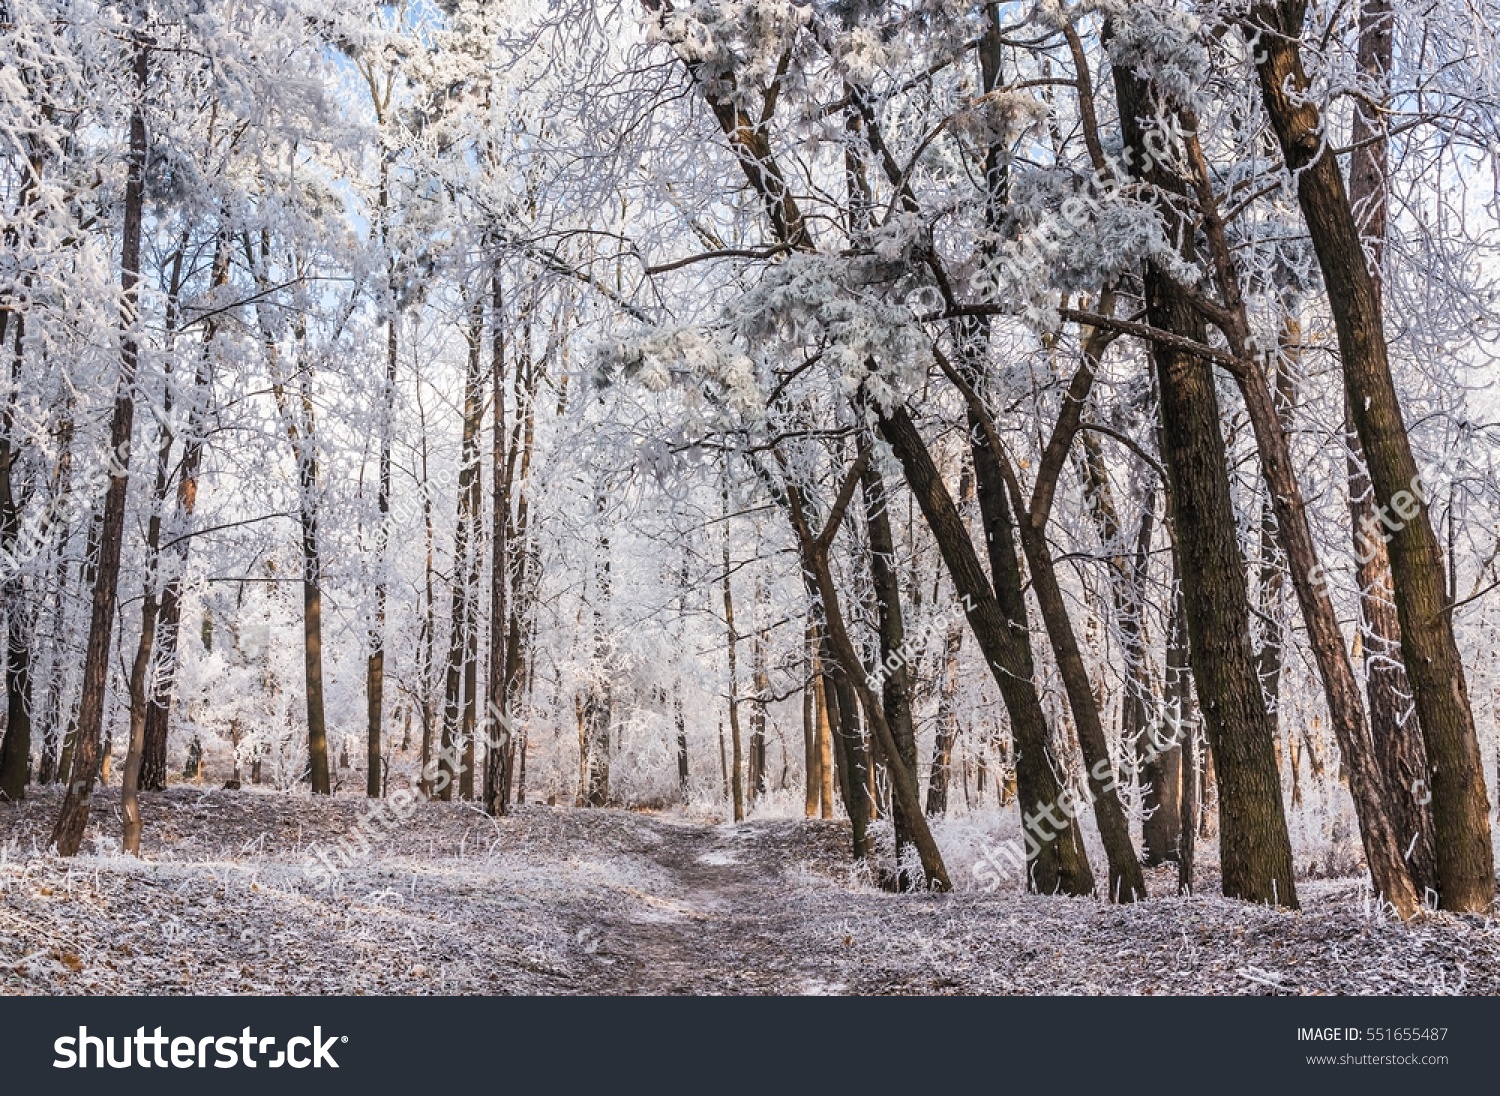 Winter scene of a snowy trees completely covered with frost #551655487